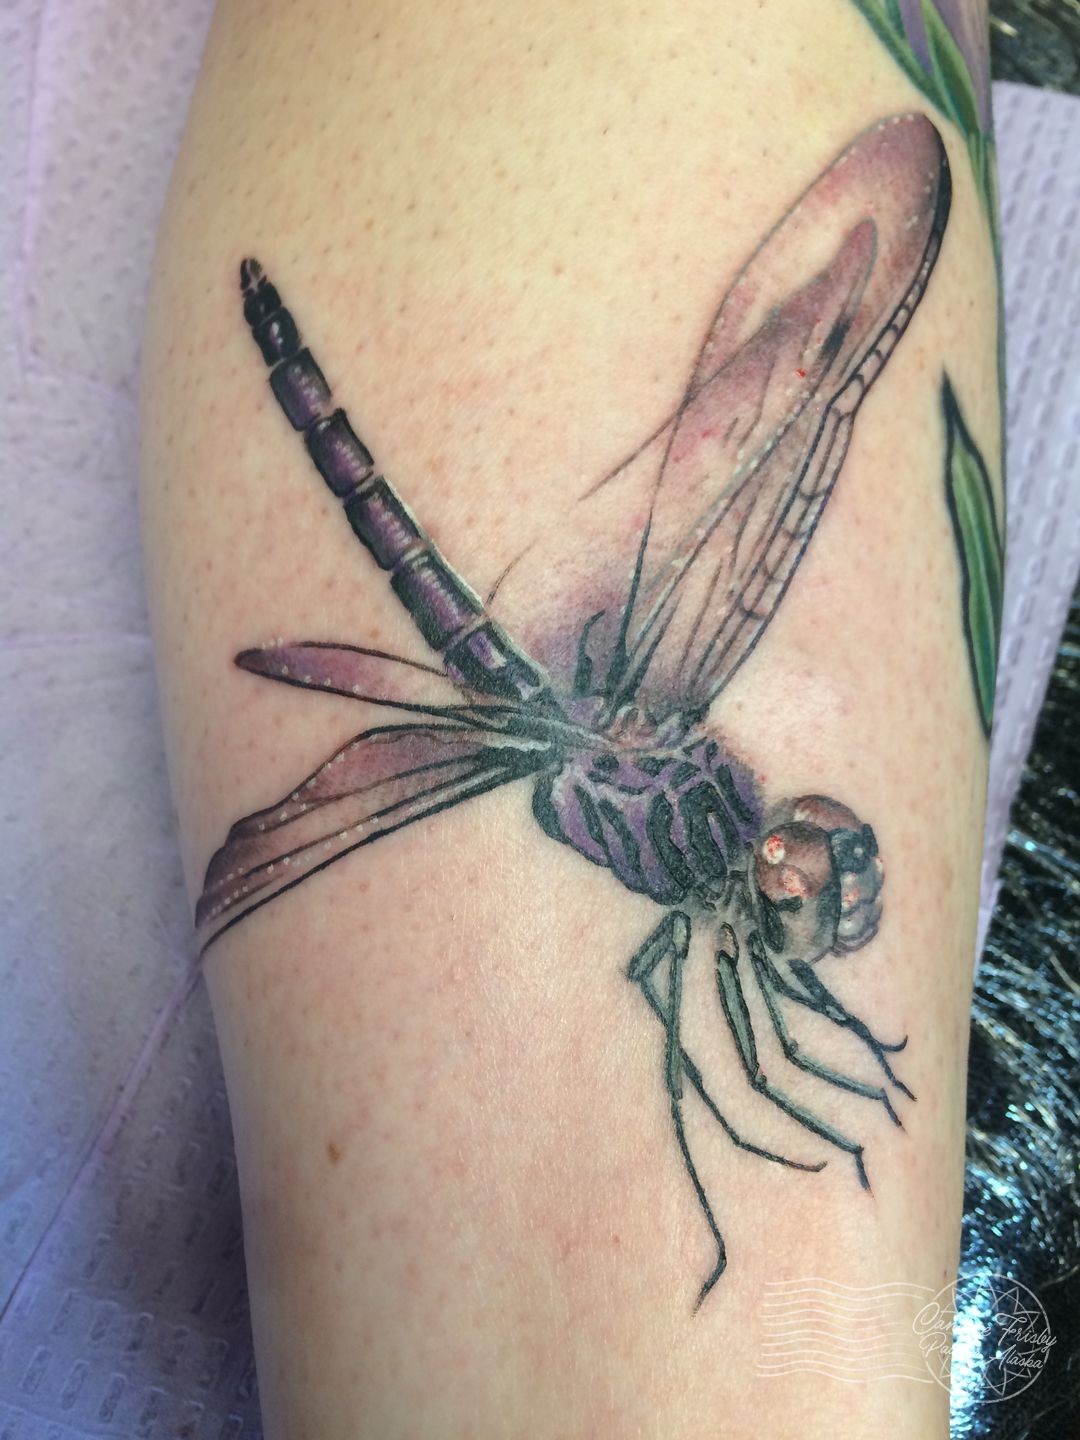 Beautiful insect tattoo can spread its wings - Boing Boing